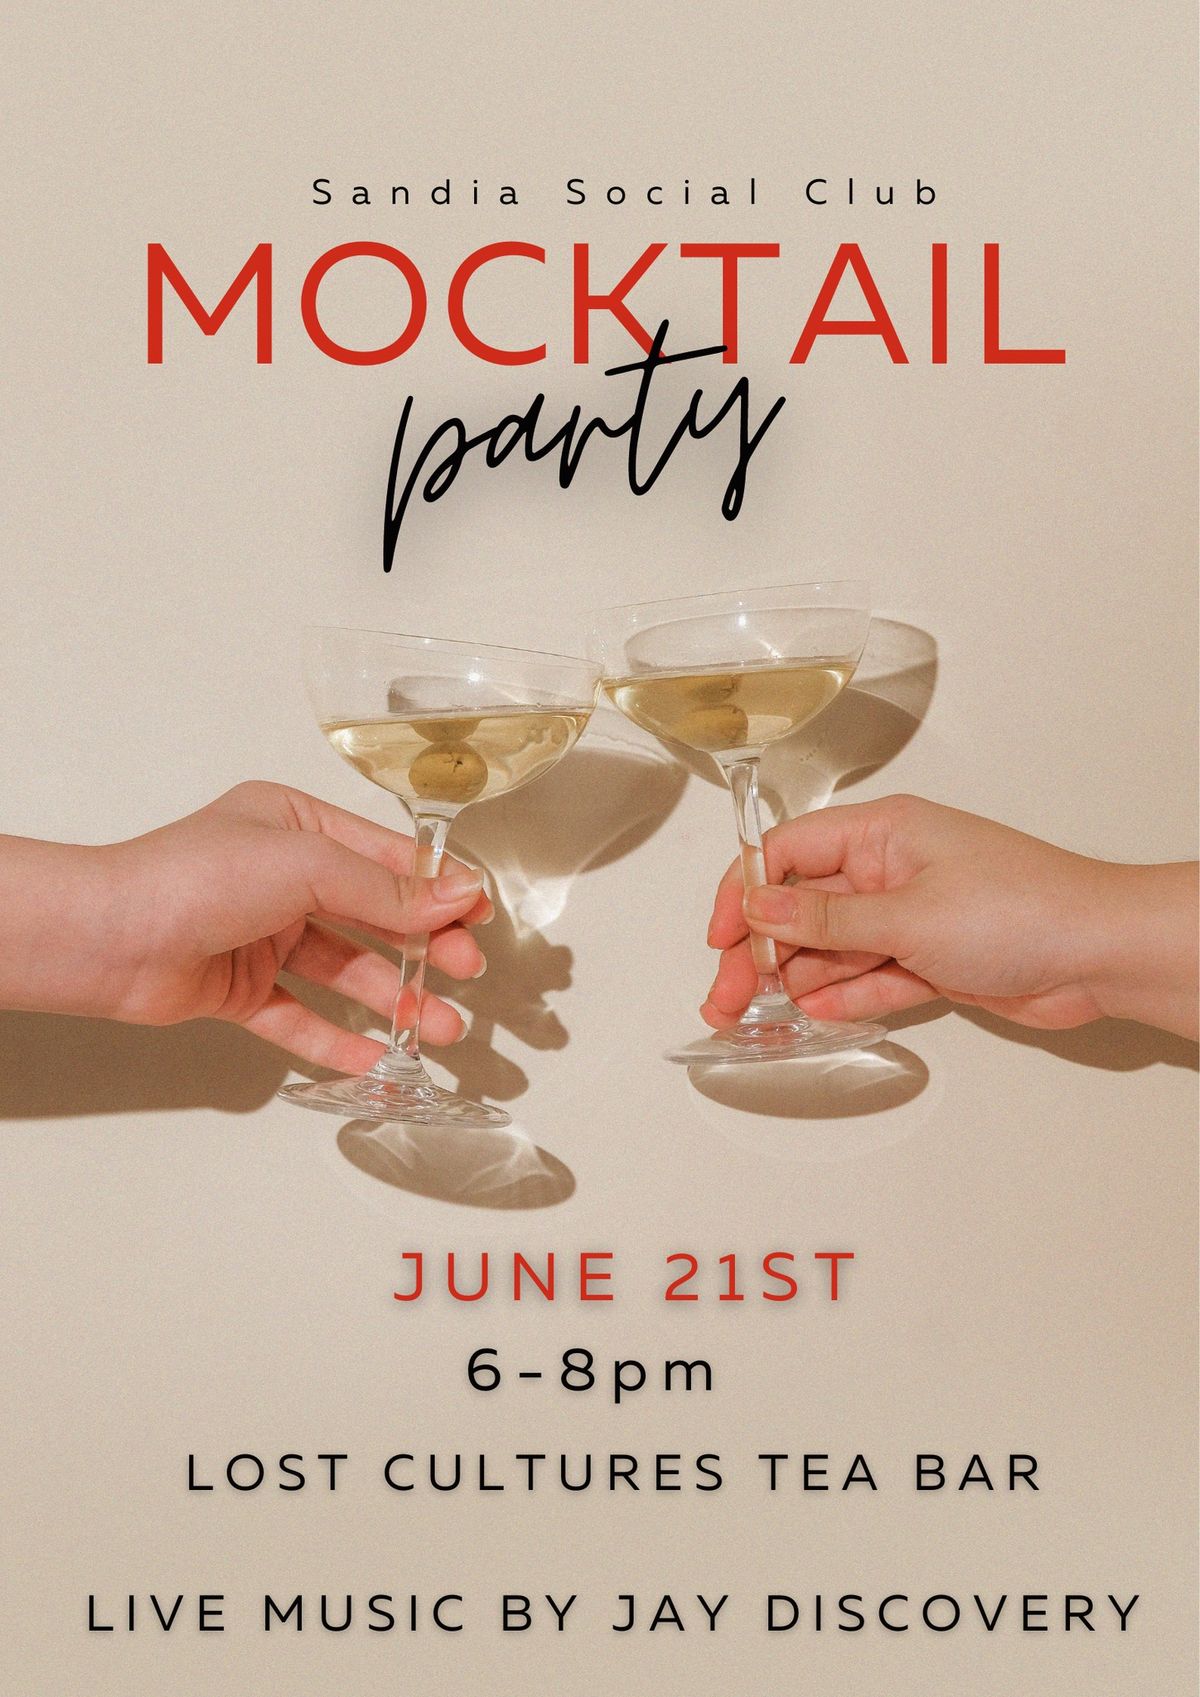 Mocktail Party at Lost Cultures Tea Bar w\/ Live Music from Jay Discovery!